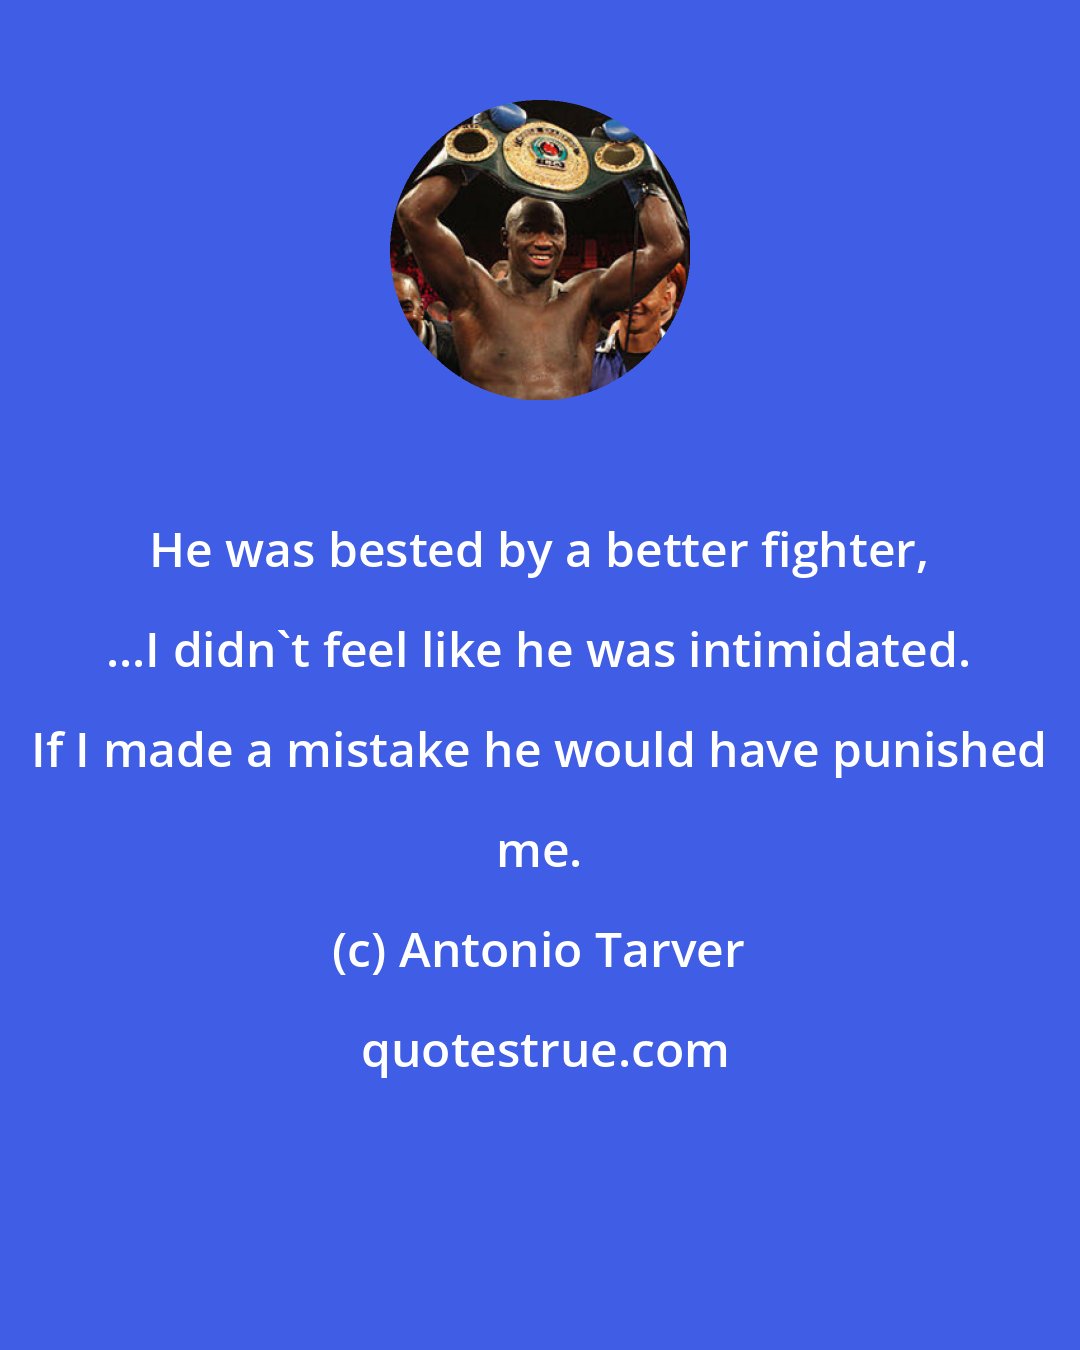 Antonio Tarver: He was bested by a better fighter, ...I didn't feel like he was intimidated. If I made a mistake he would have punished me.